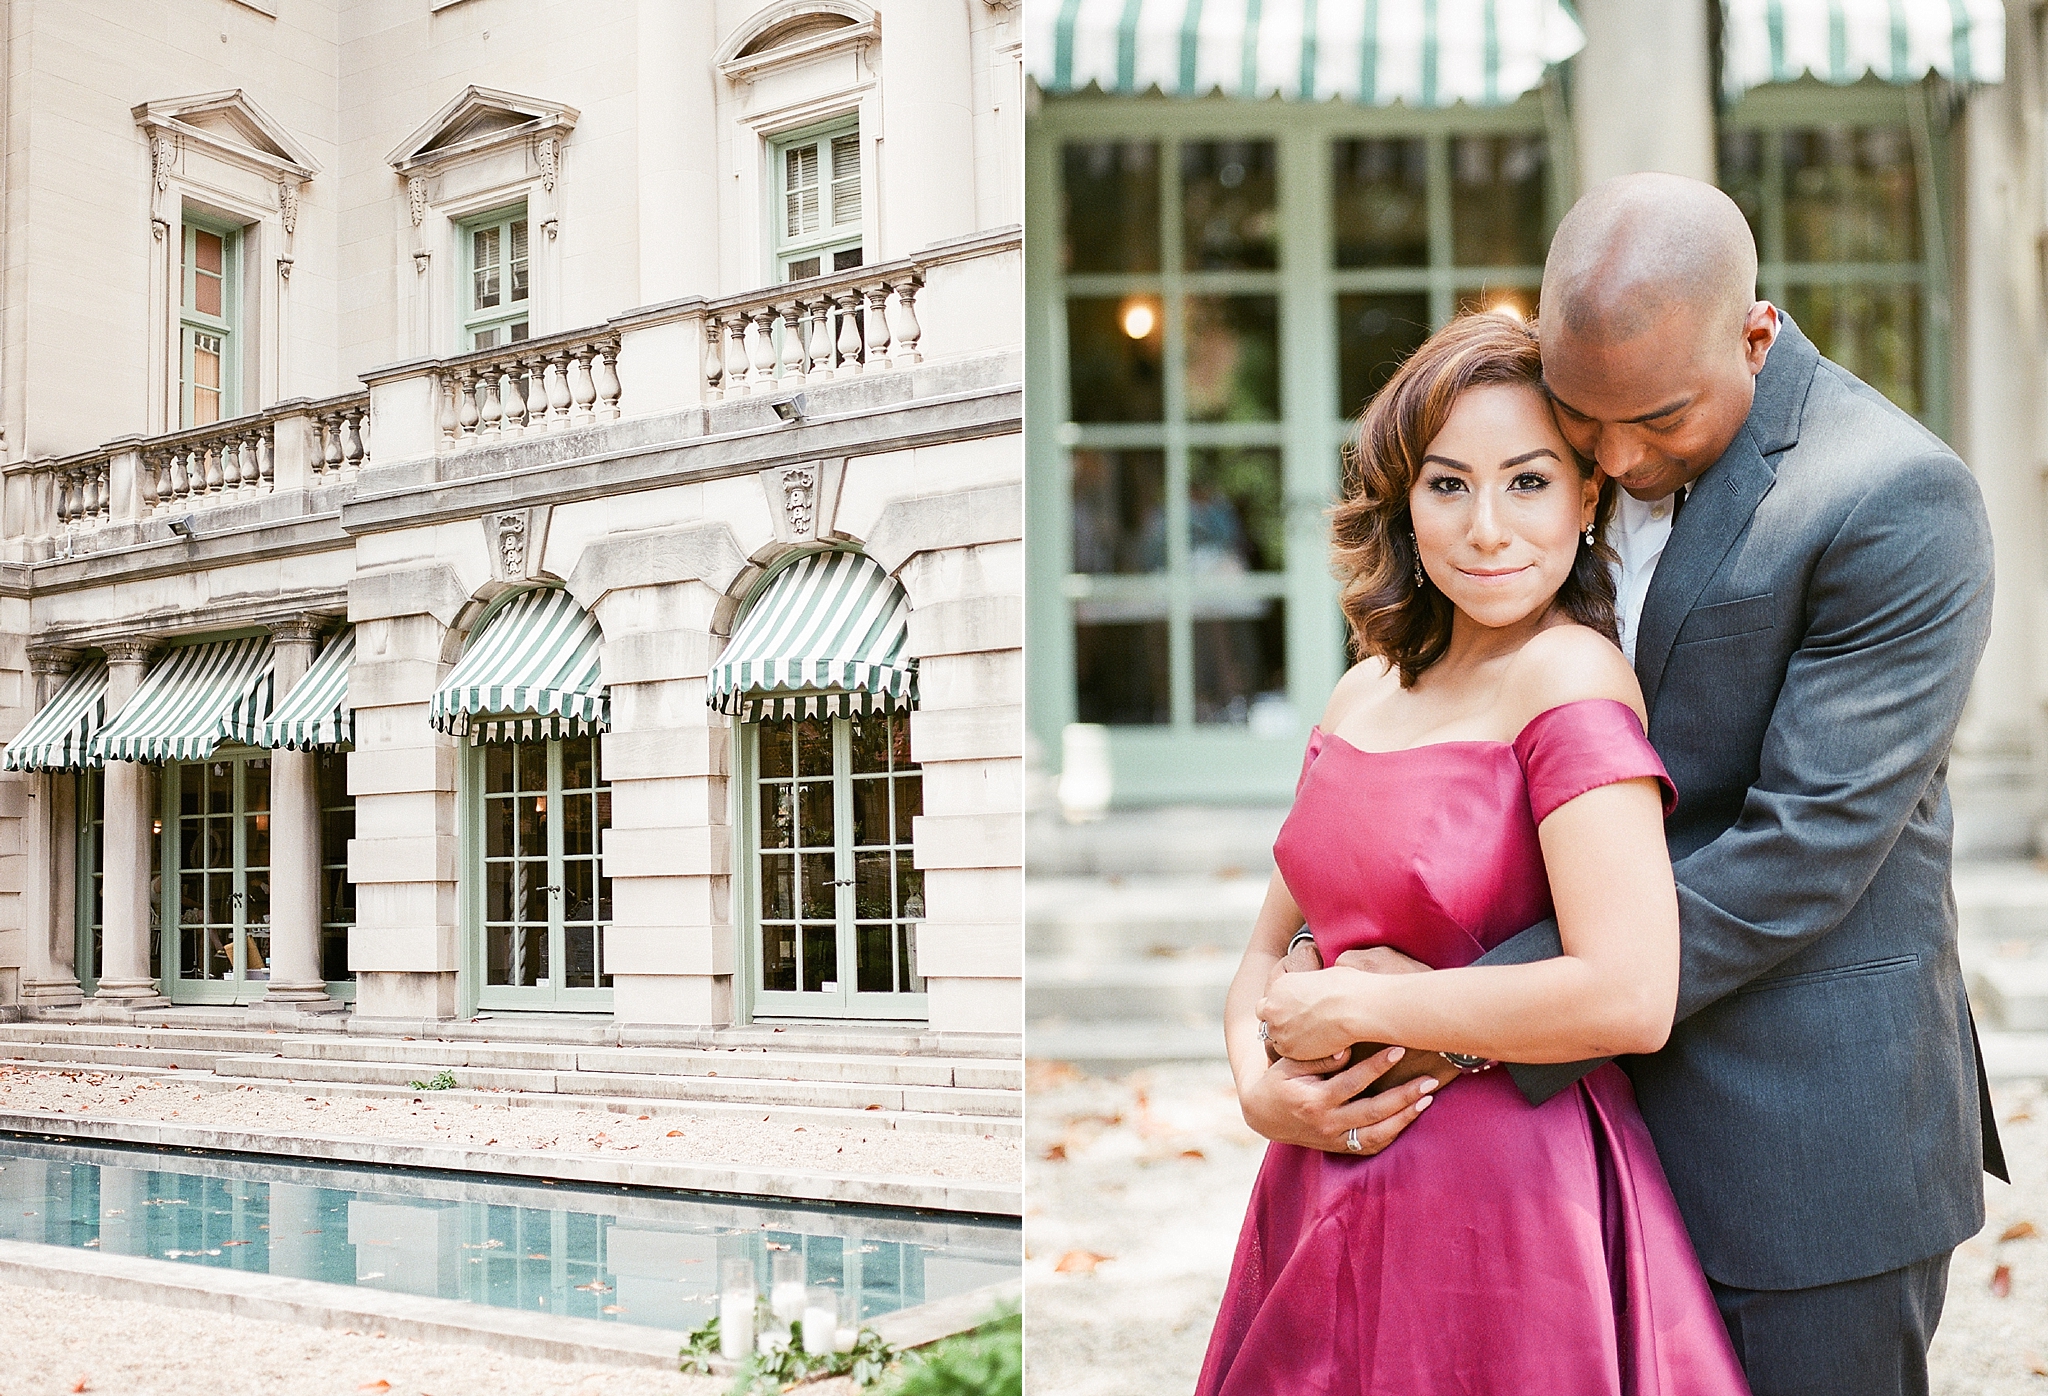 This chic anniversary session was photographed at the Anderson House in Washington, DC by film photographer Alicia Lacey.